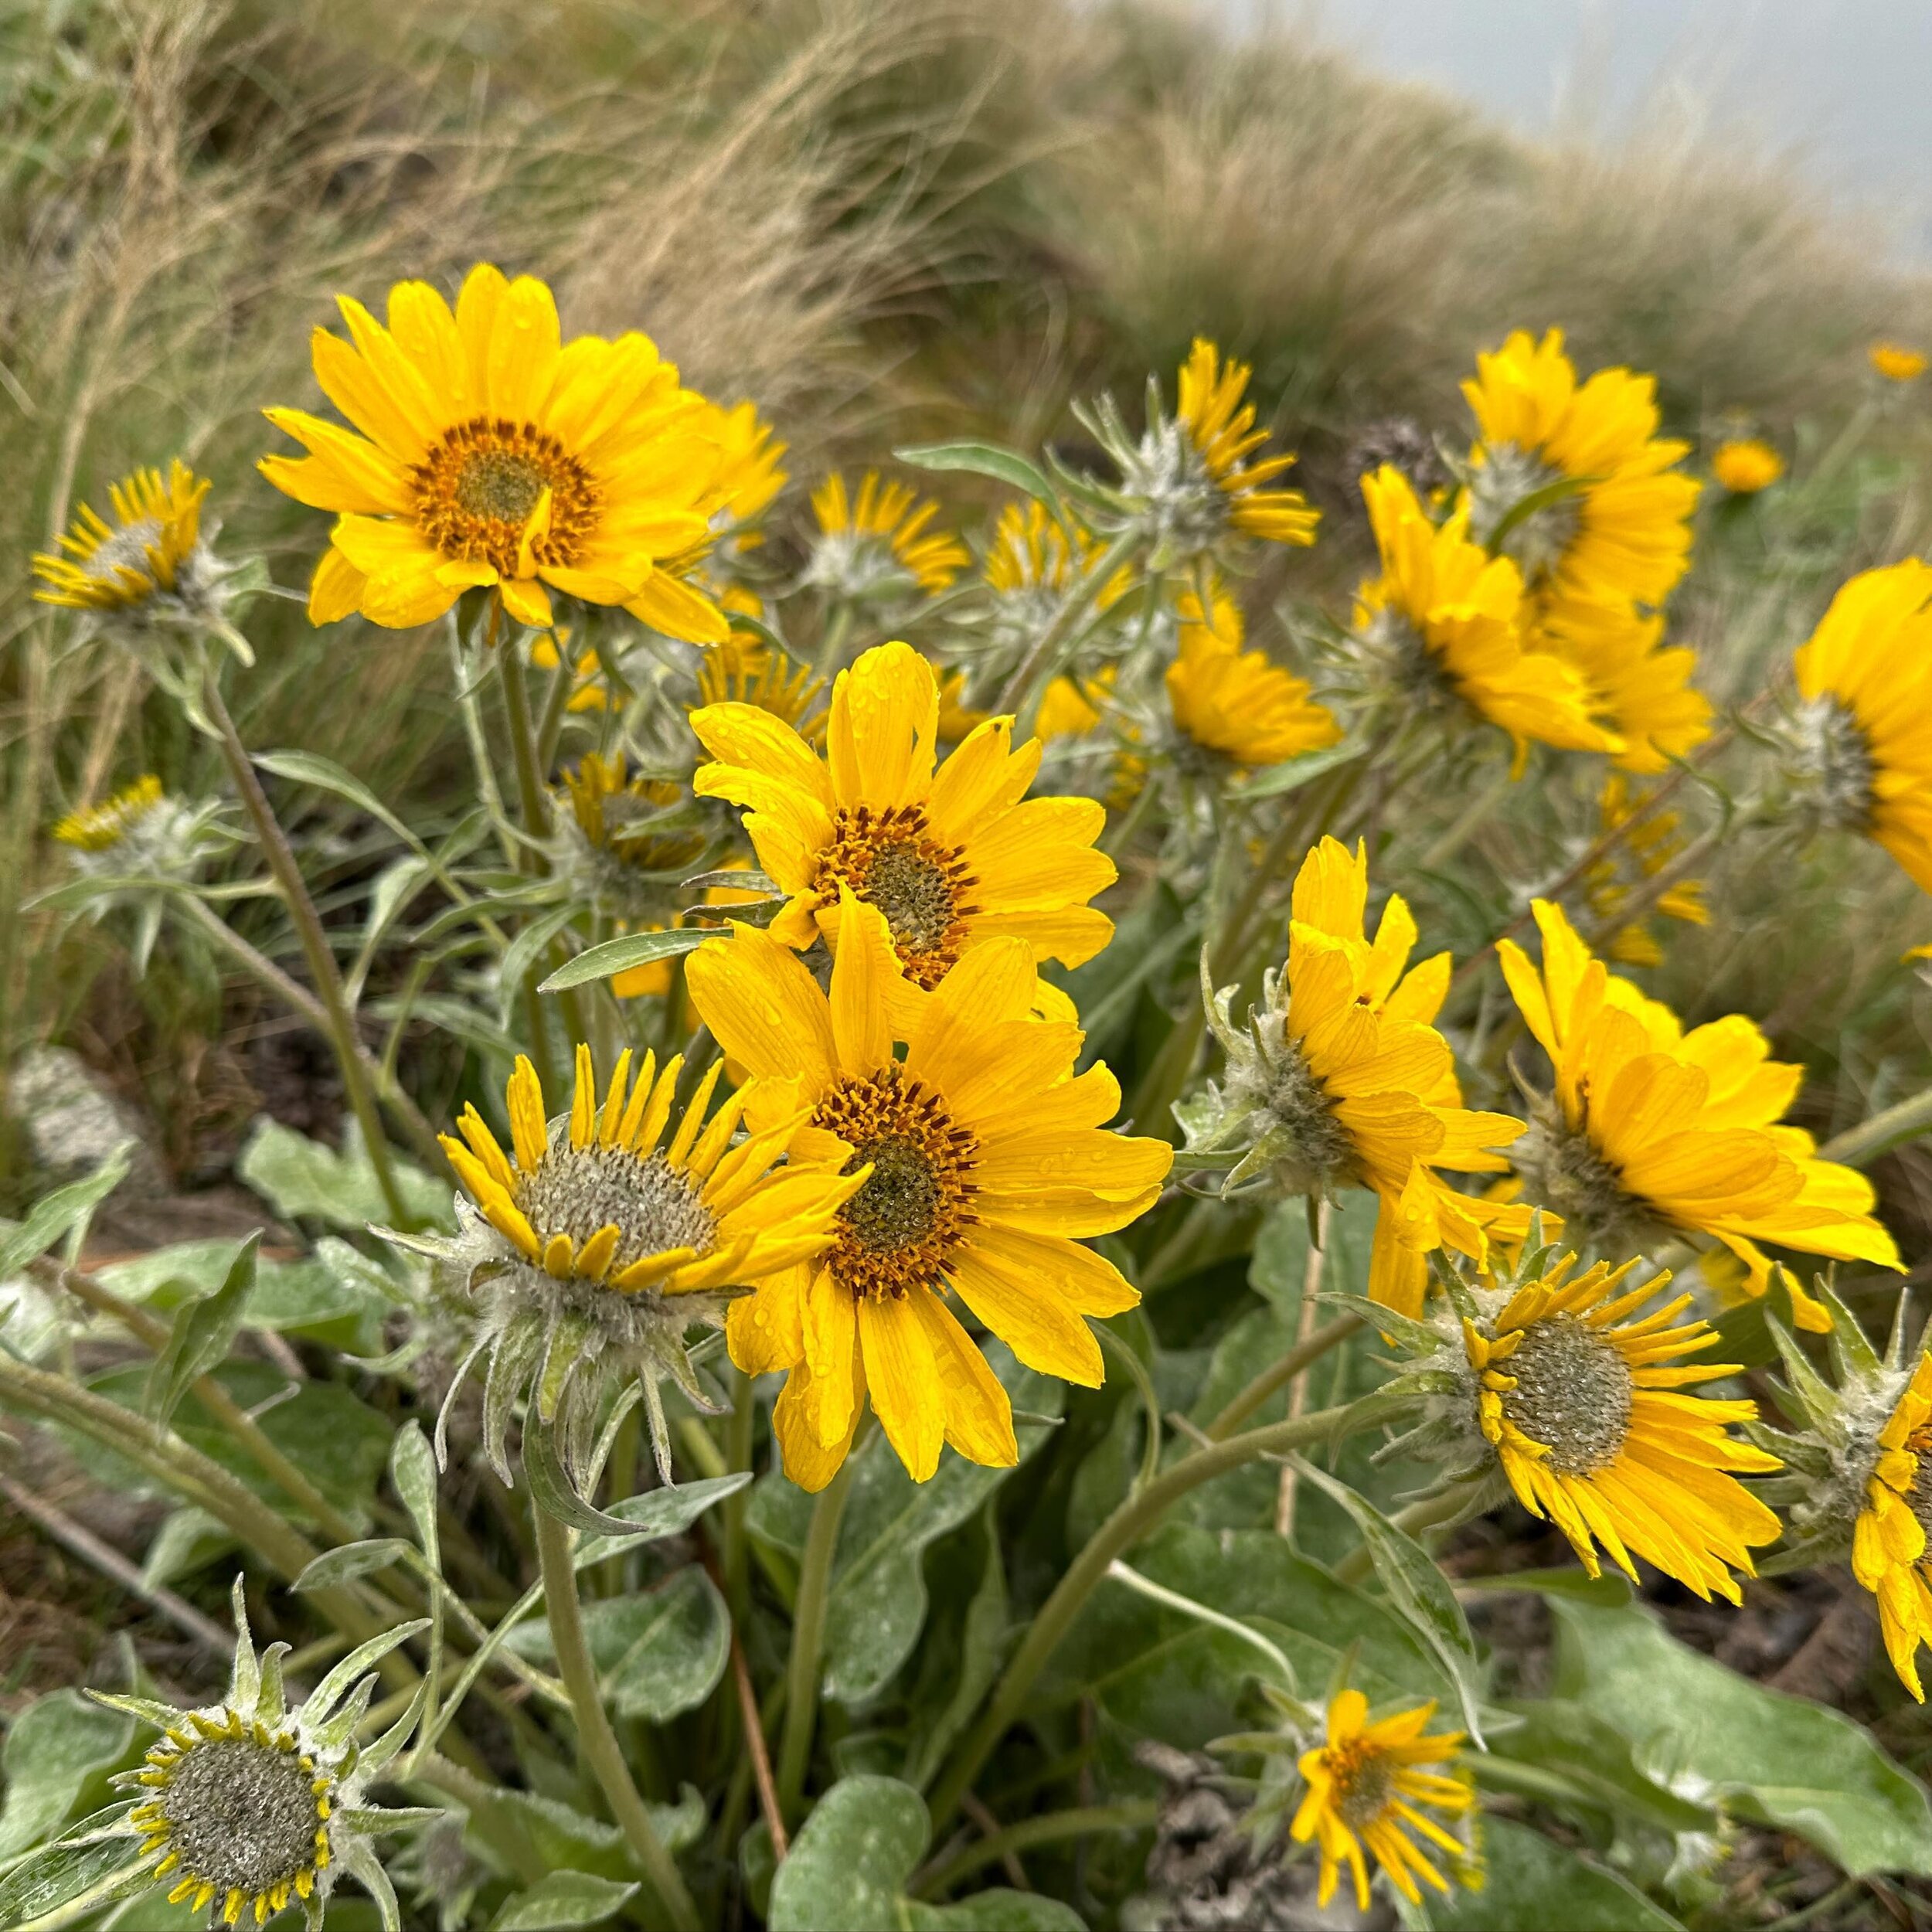 The Arrowleaf Balsamroot has begun flowering! My favourite place to see them is at Kalamoir park.